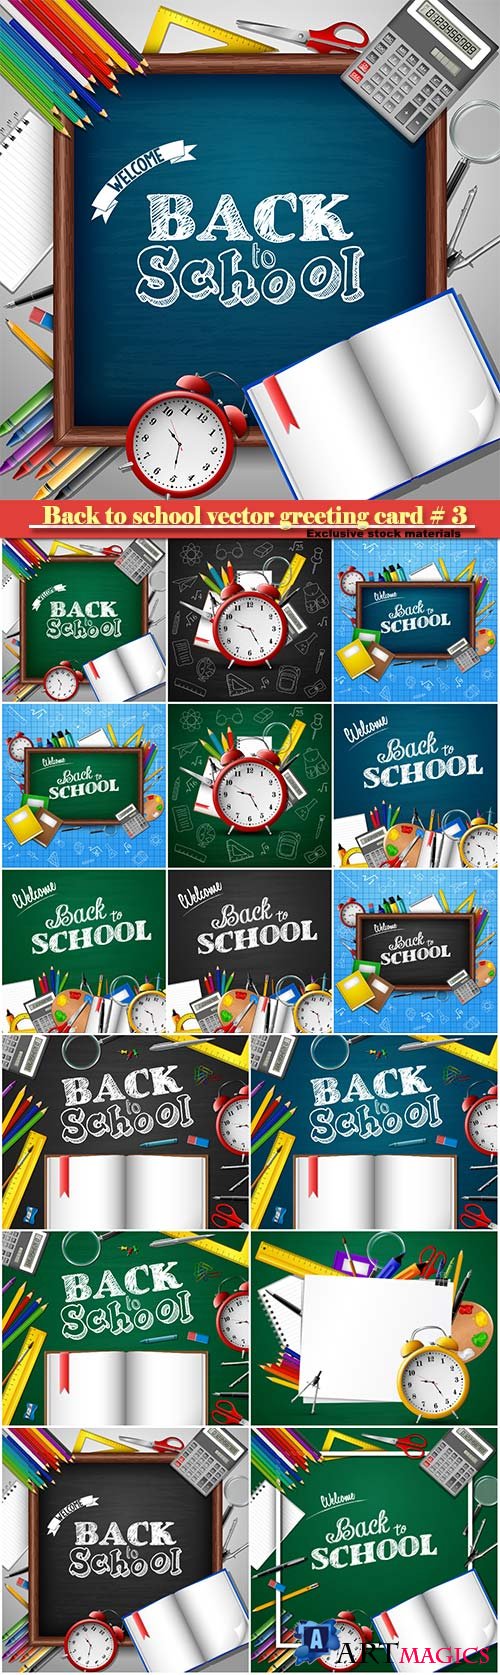 Back to school vector greeting card # 3